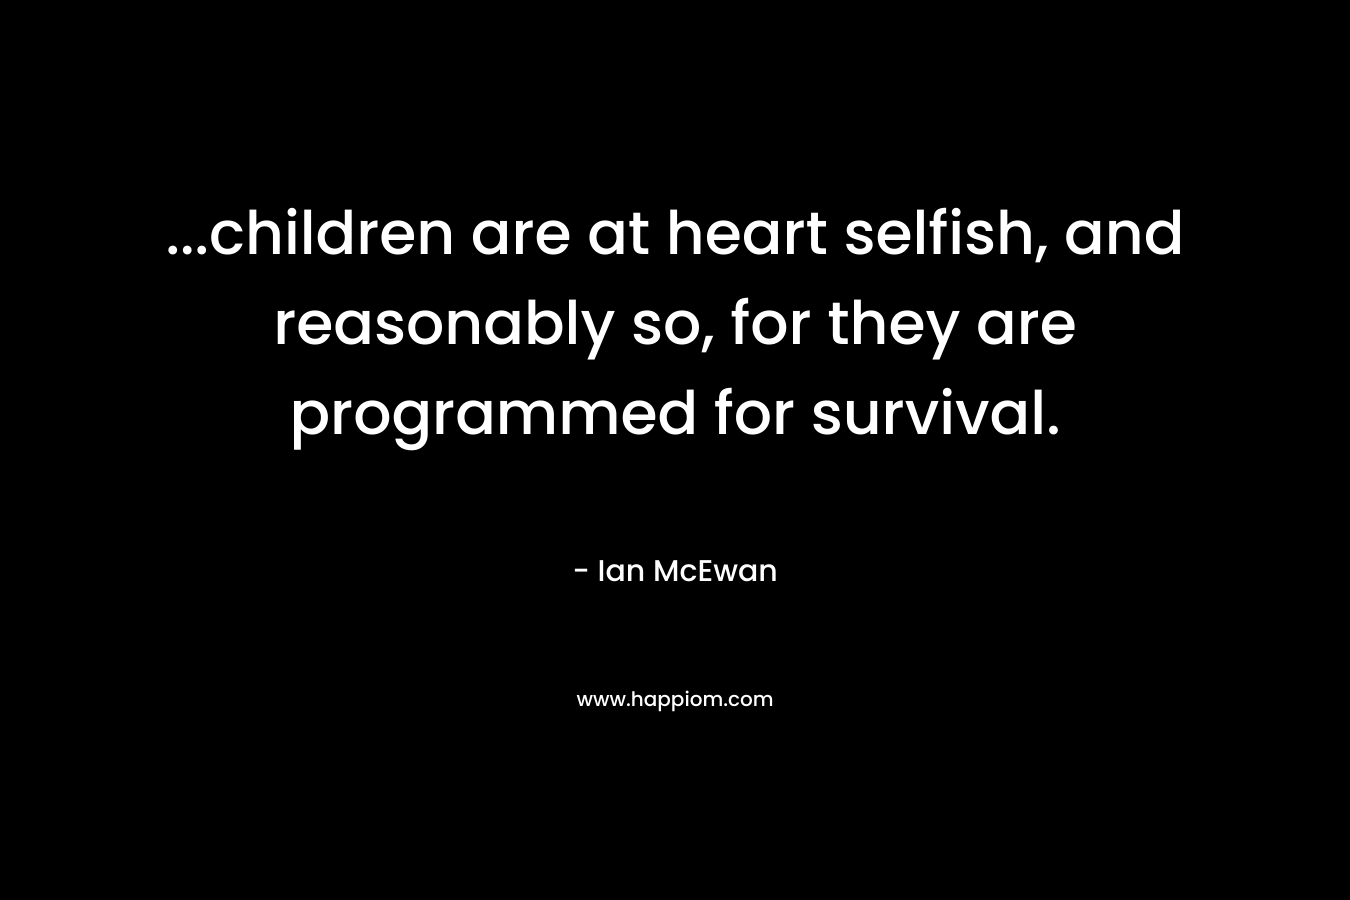 ...children are at heart selfish, and reasonably so, for they are programmed for survival.